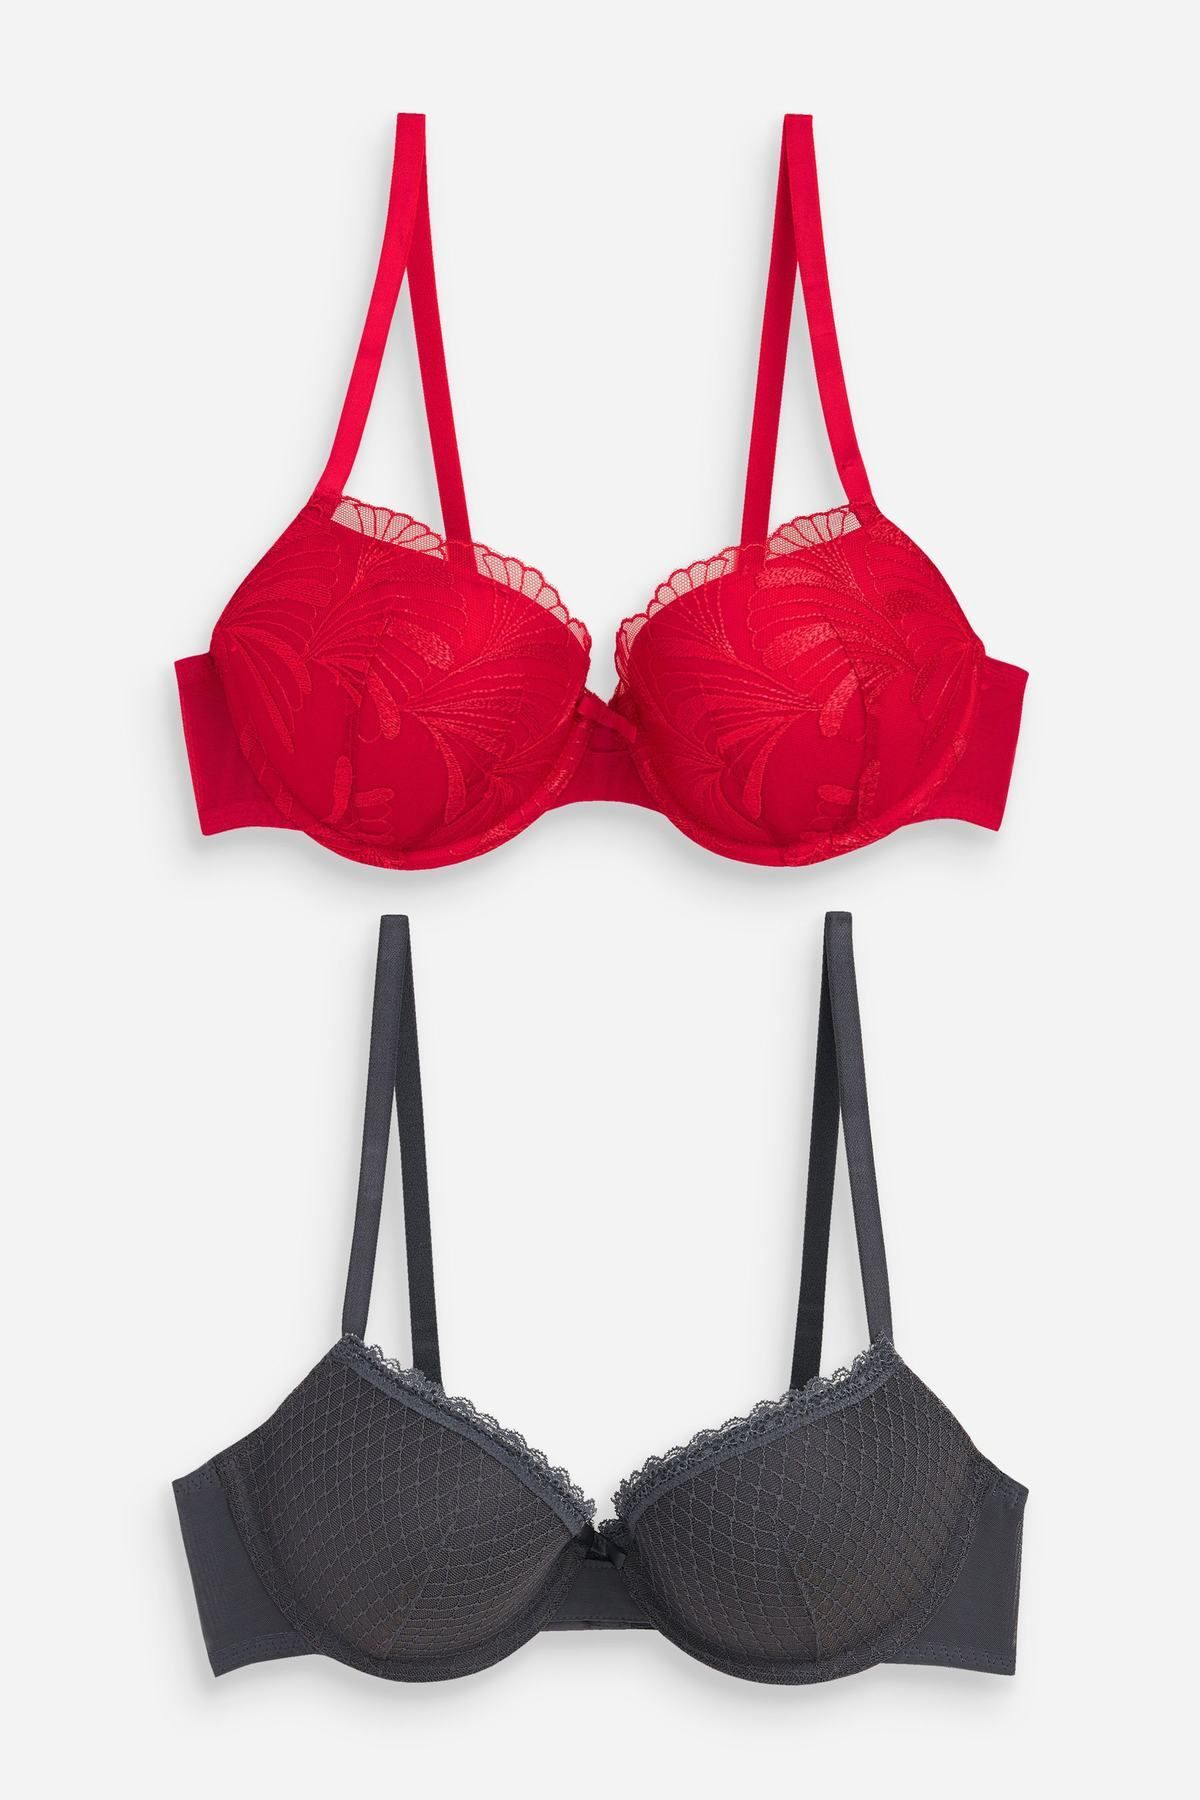 Embroidered Bras 2 Pack